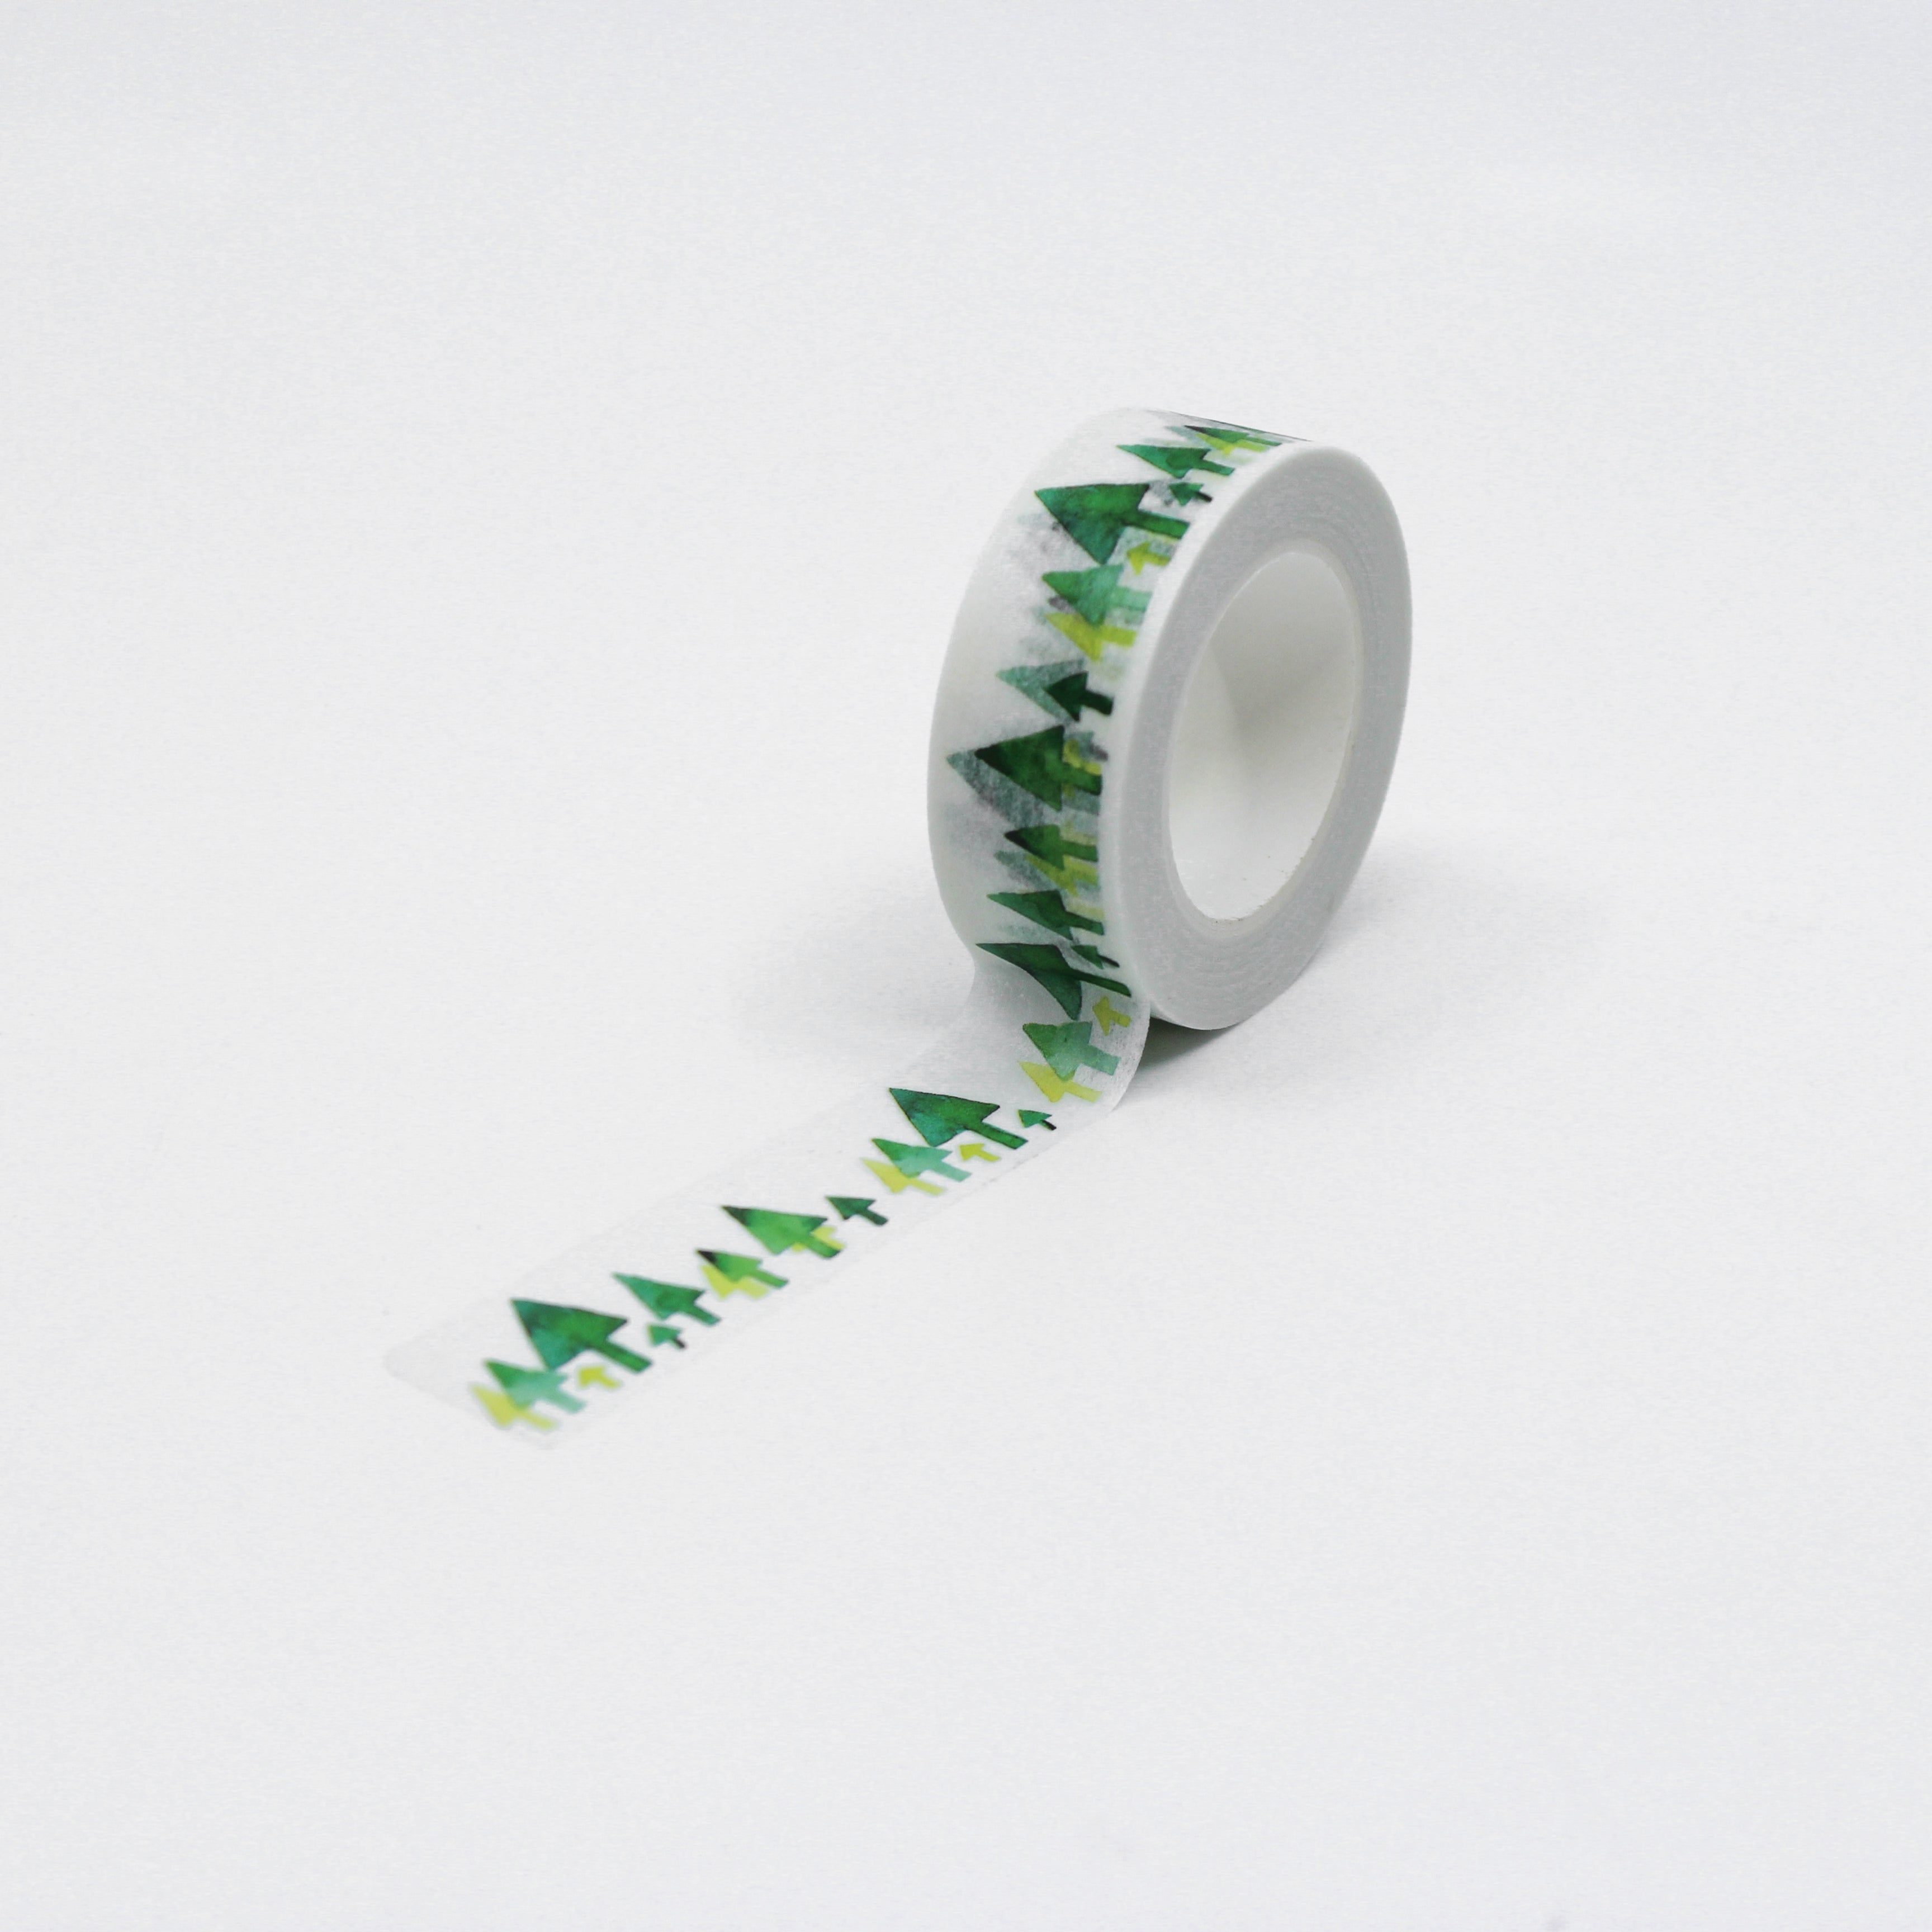 This is a full pattern repeat view of  green holiday tree washi tape BBB Supplies Craft Shop